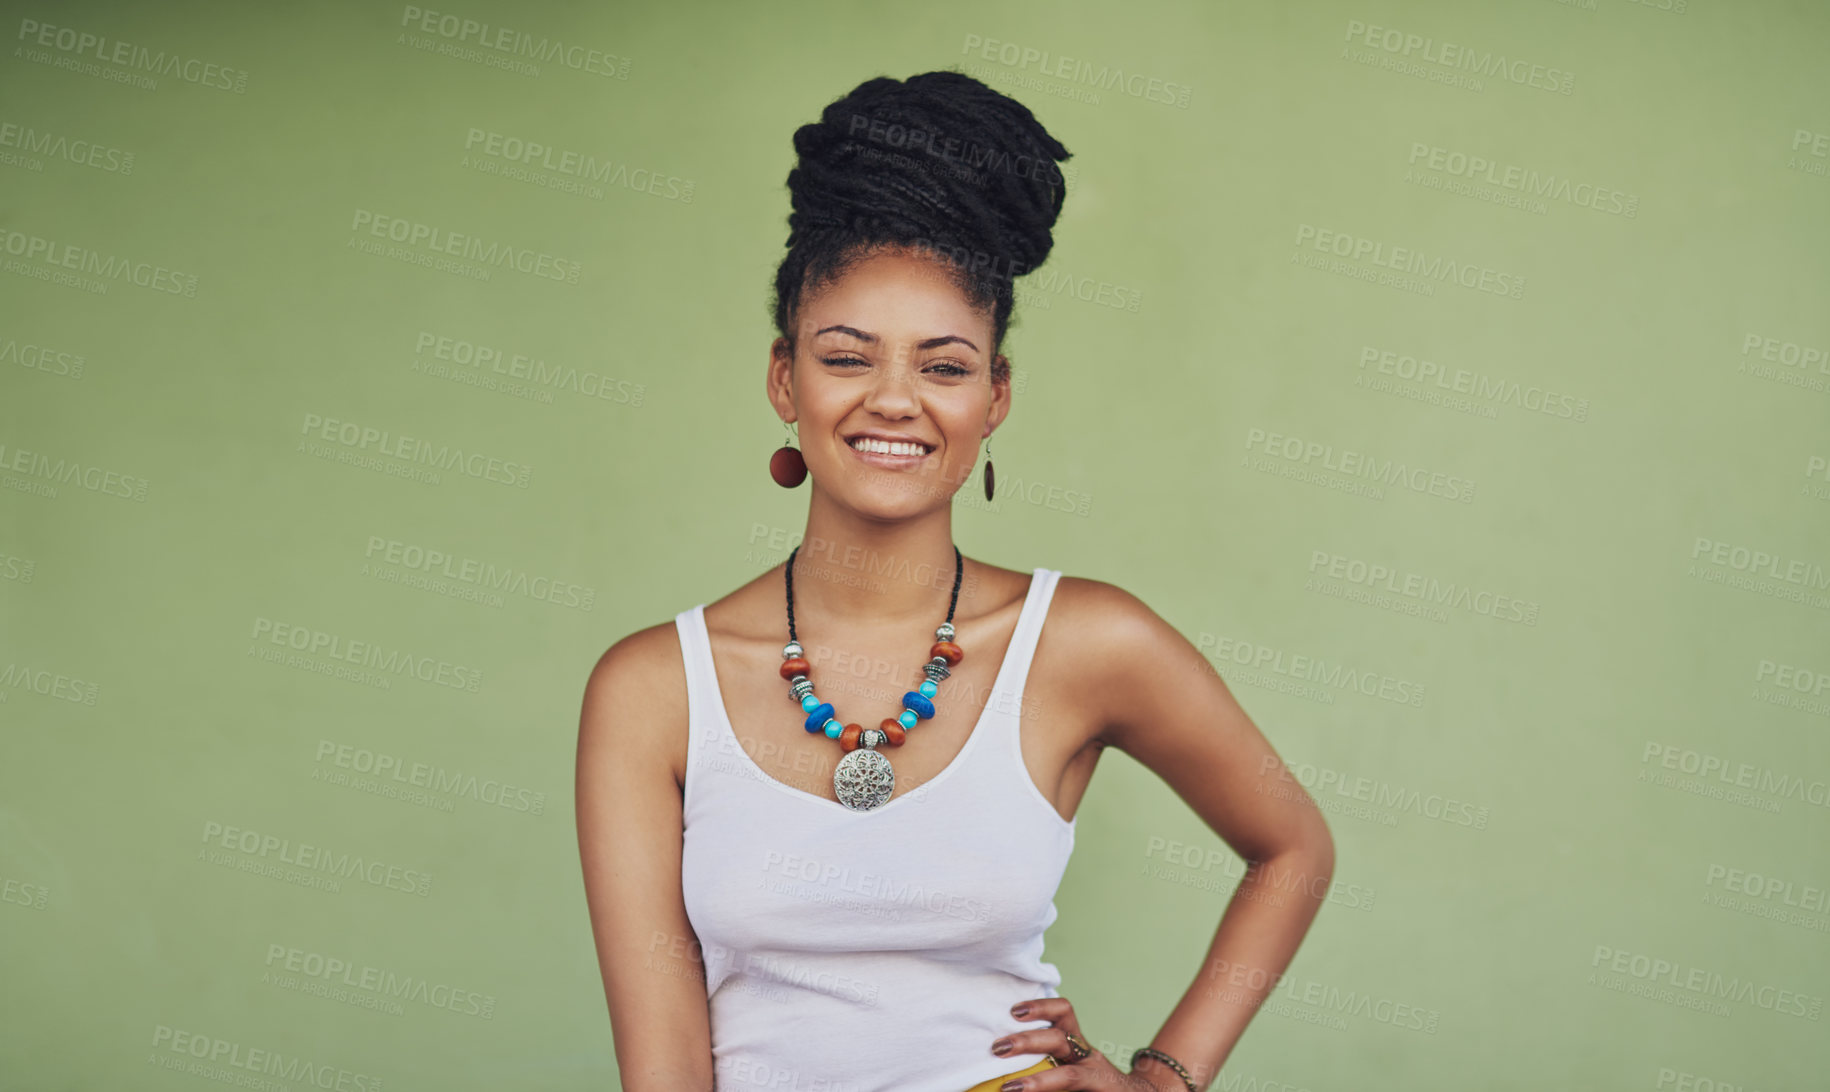 Buy stock photo Portrait of an attractive and trendy young woman posing against a green background